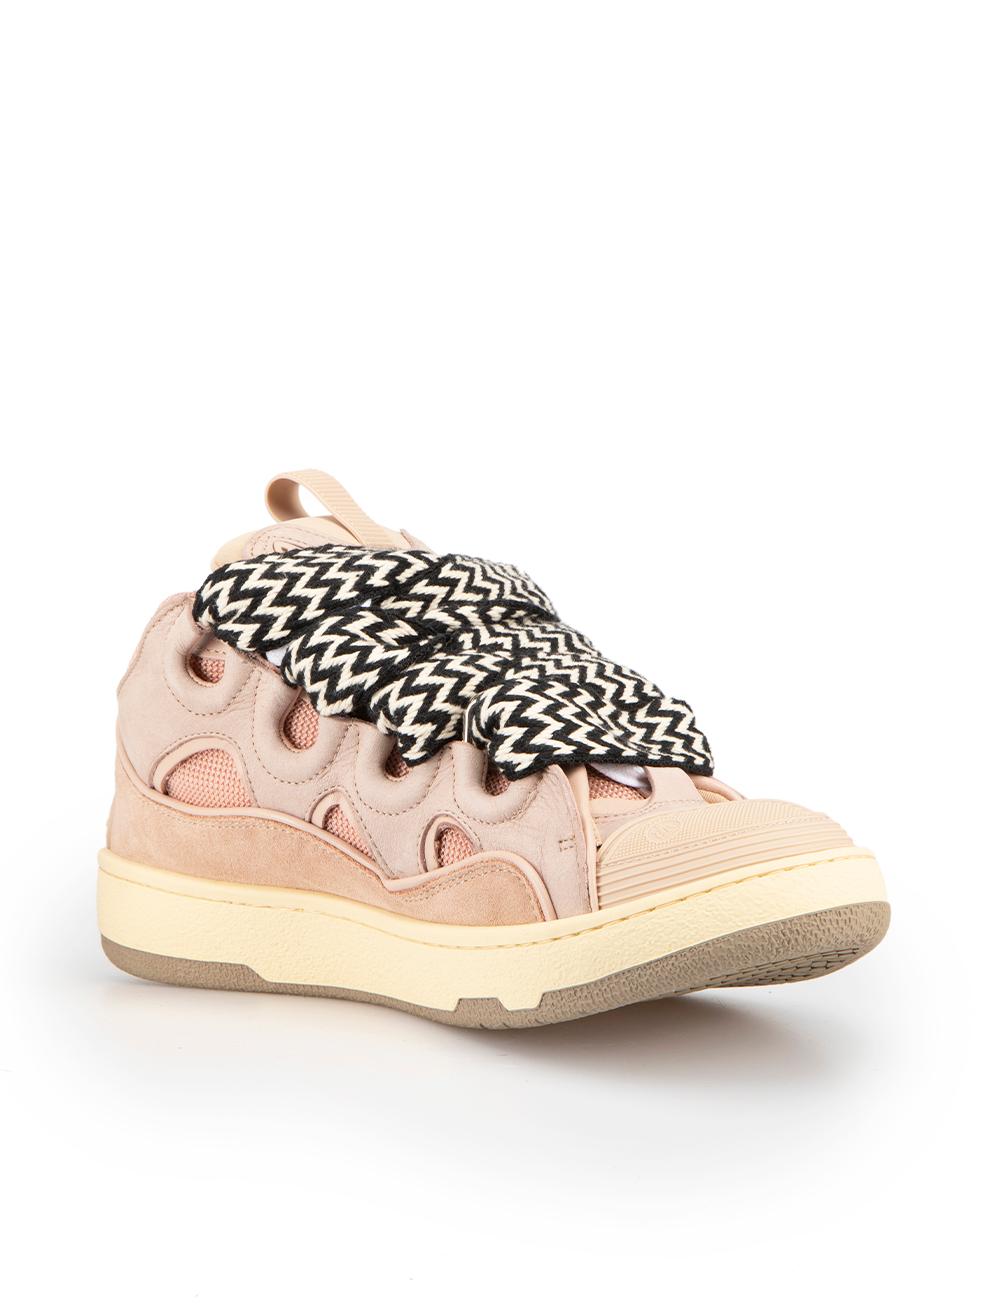 CONDITION is Never Worn. No visible wear to shoes is evident on this used Lanvin designer resale item. These shoes come with original box and dust bag.



Details


Pink

Leather

Flatform trainers

Thick zig-zag patterned decorative laces

Thin